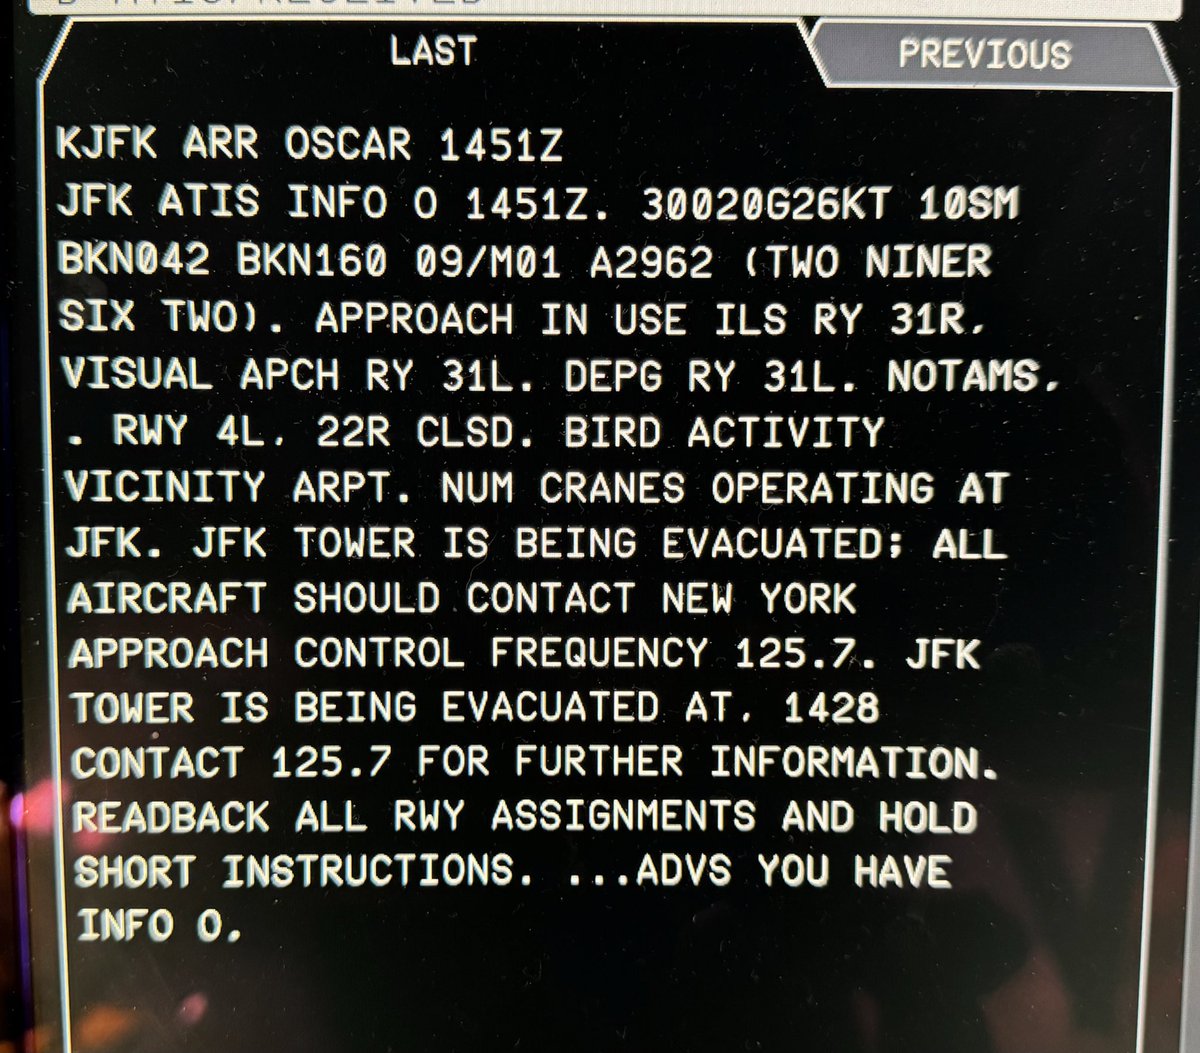 These aren’t your regular digital weather reports. I don’t think I’ve ever seen one that asks you to call a number to land (not sure how you’d do that). These were obviously during the earthquake last week. Not something you see every day. #avgeek #aviation #NewYork #airport